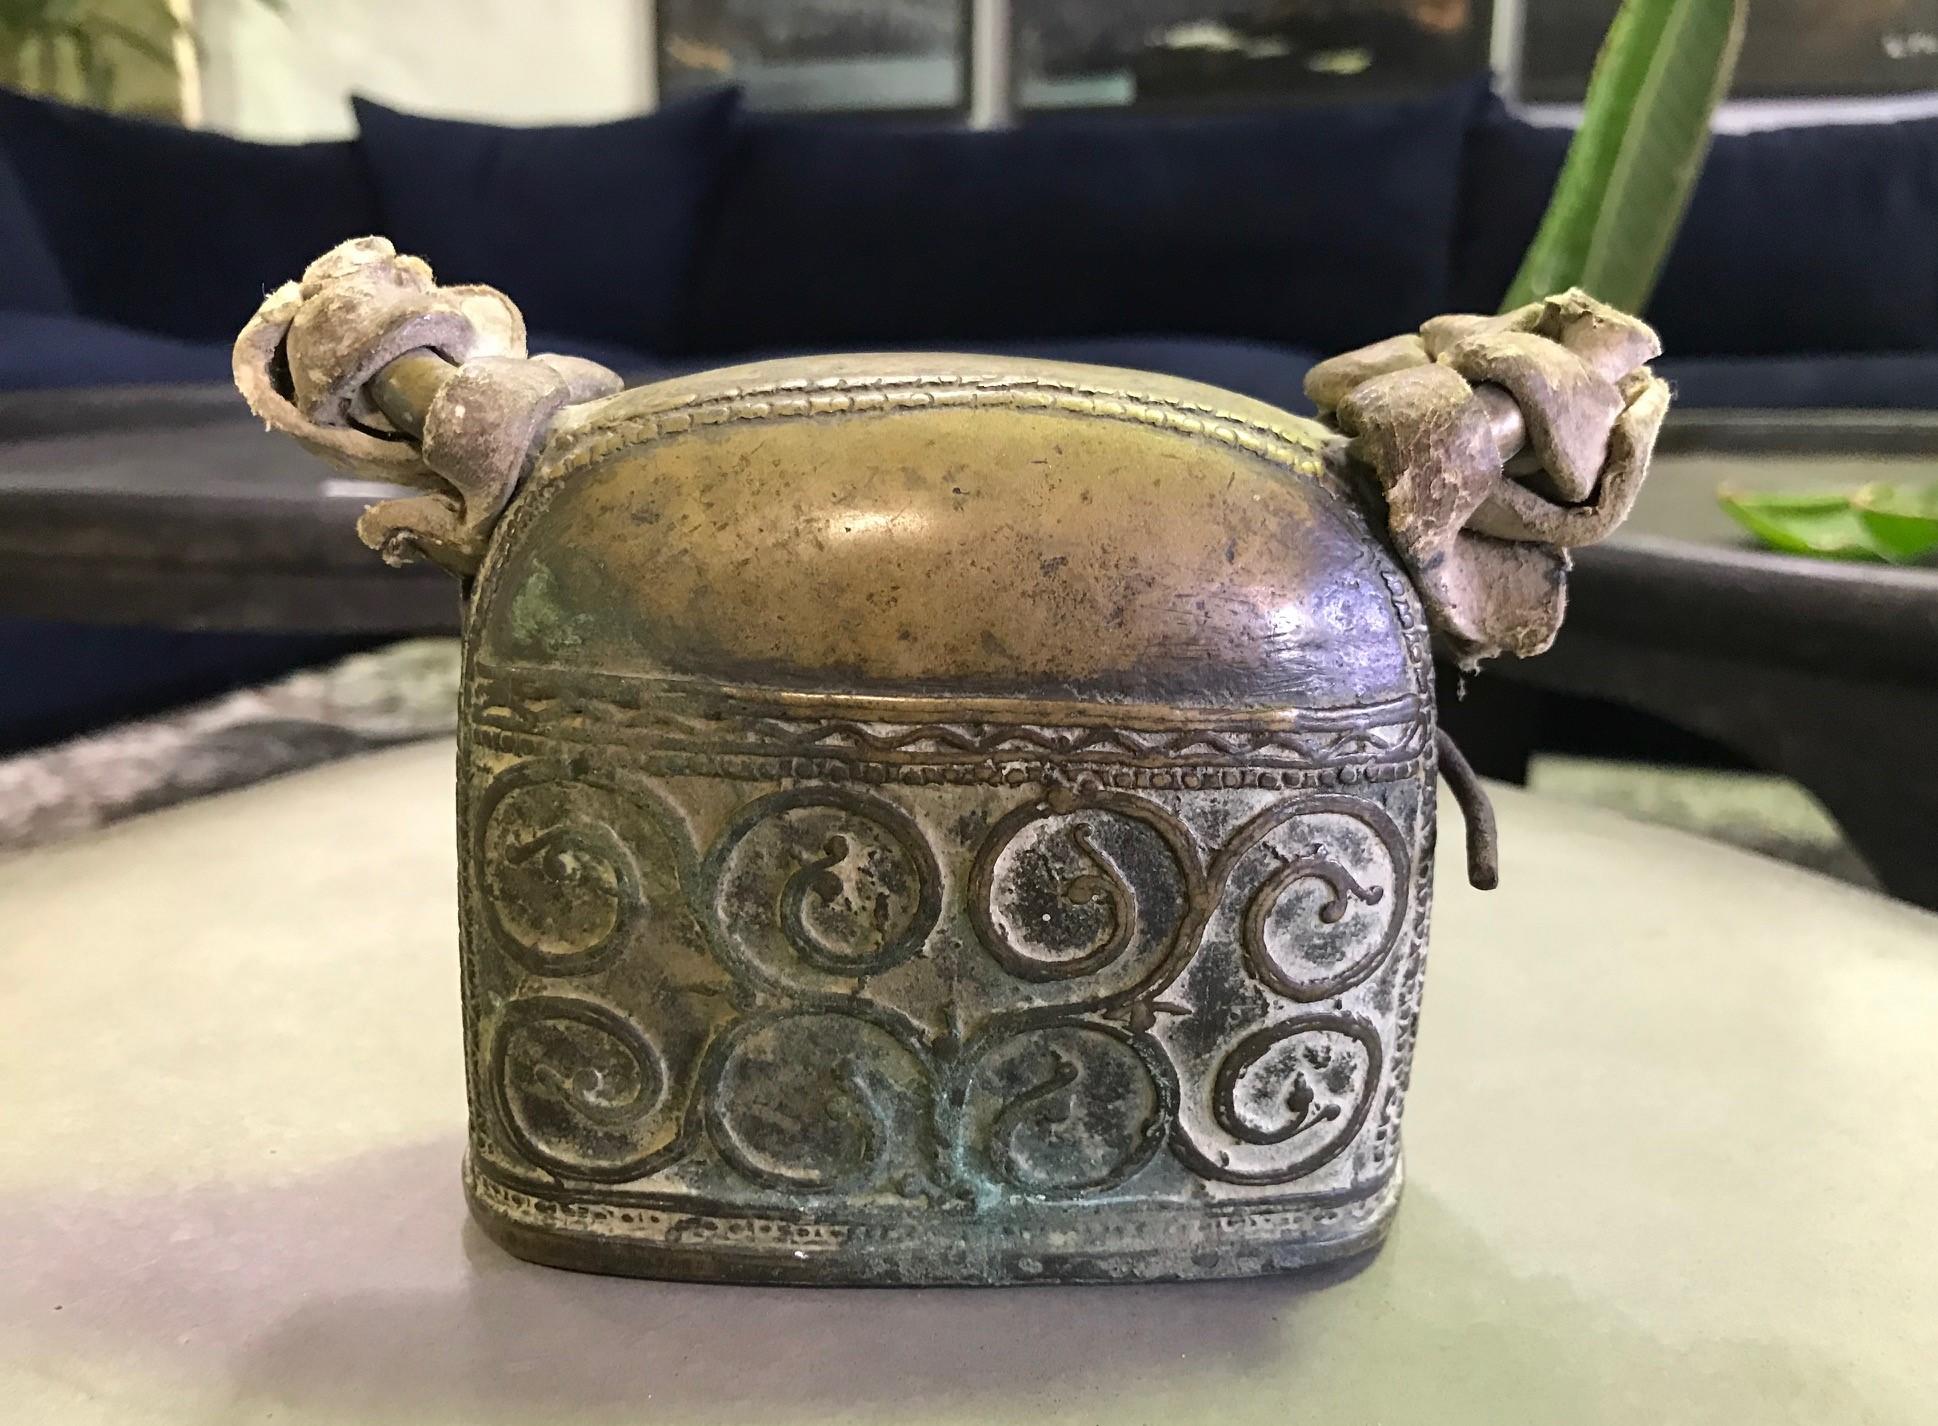 A fantastic Primitive piece. Hefty and well detailed with clear signs of age and use. Nice patina. Appears to have original leather straps. 

Likely from India or Southeast Asia. 

Sure to stand out accent piece in about any setting.